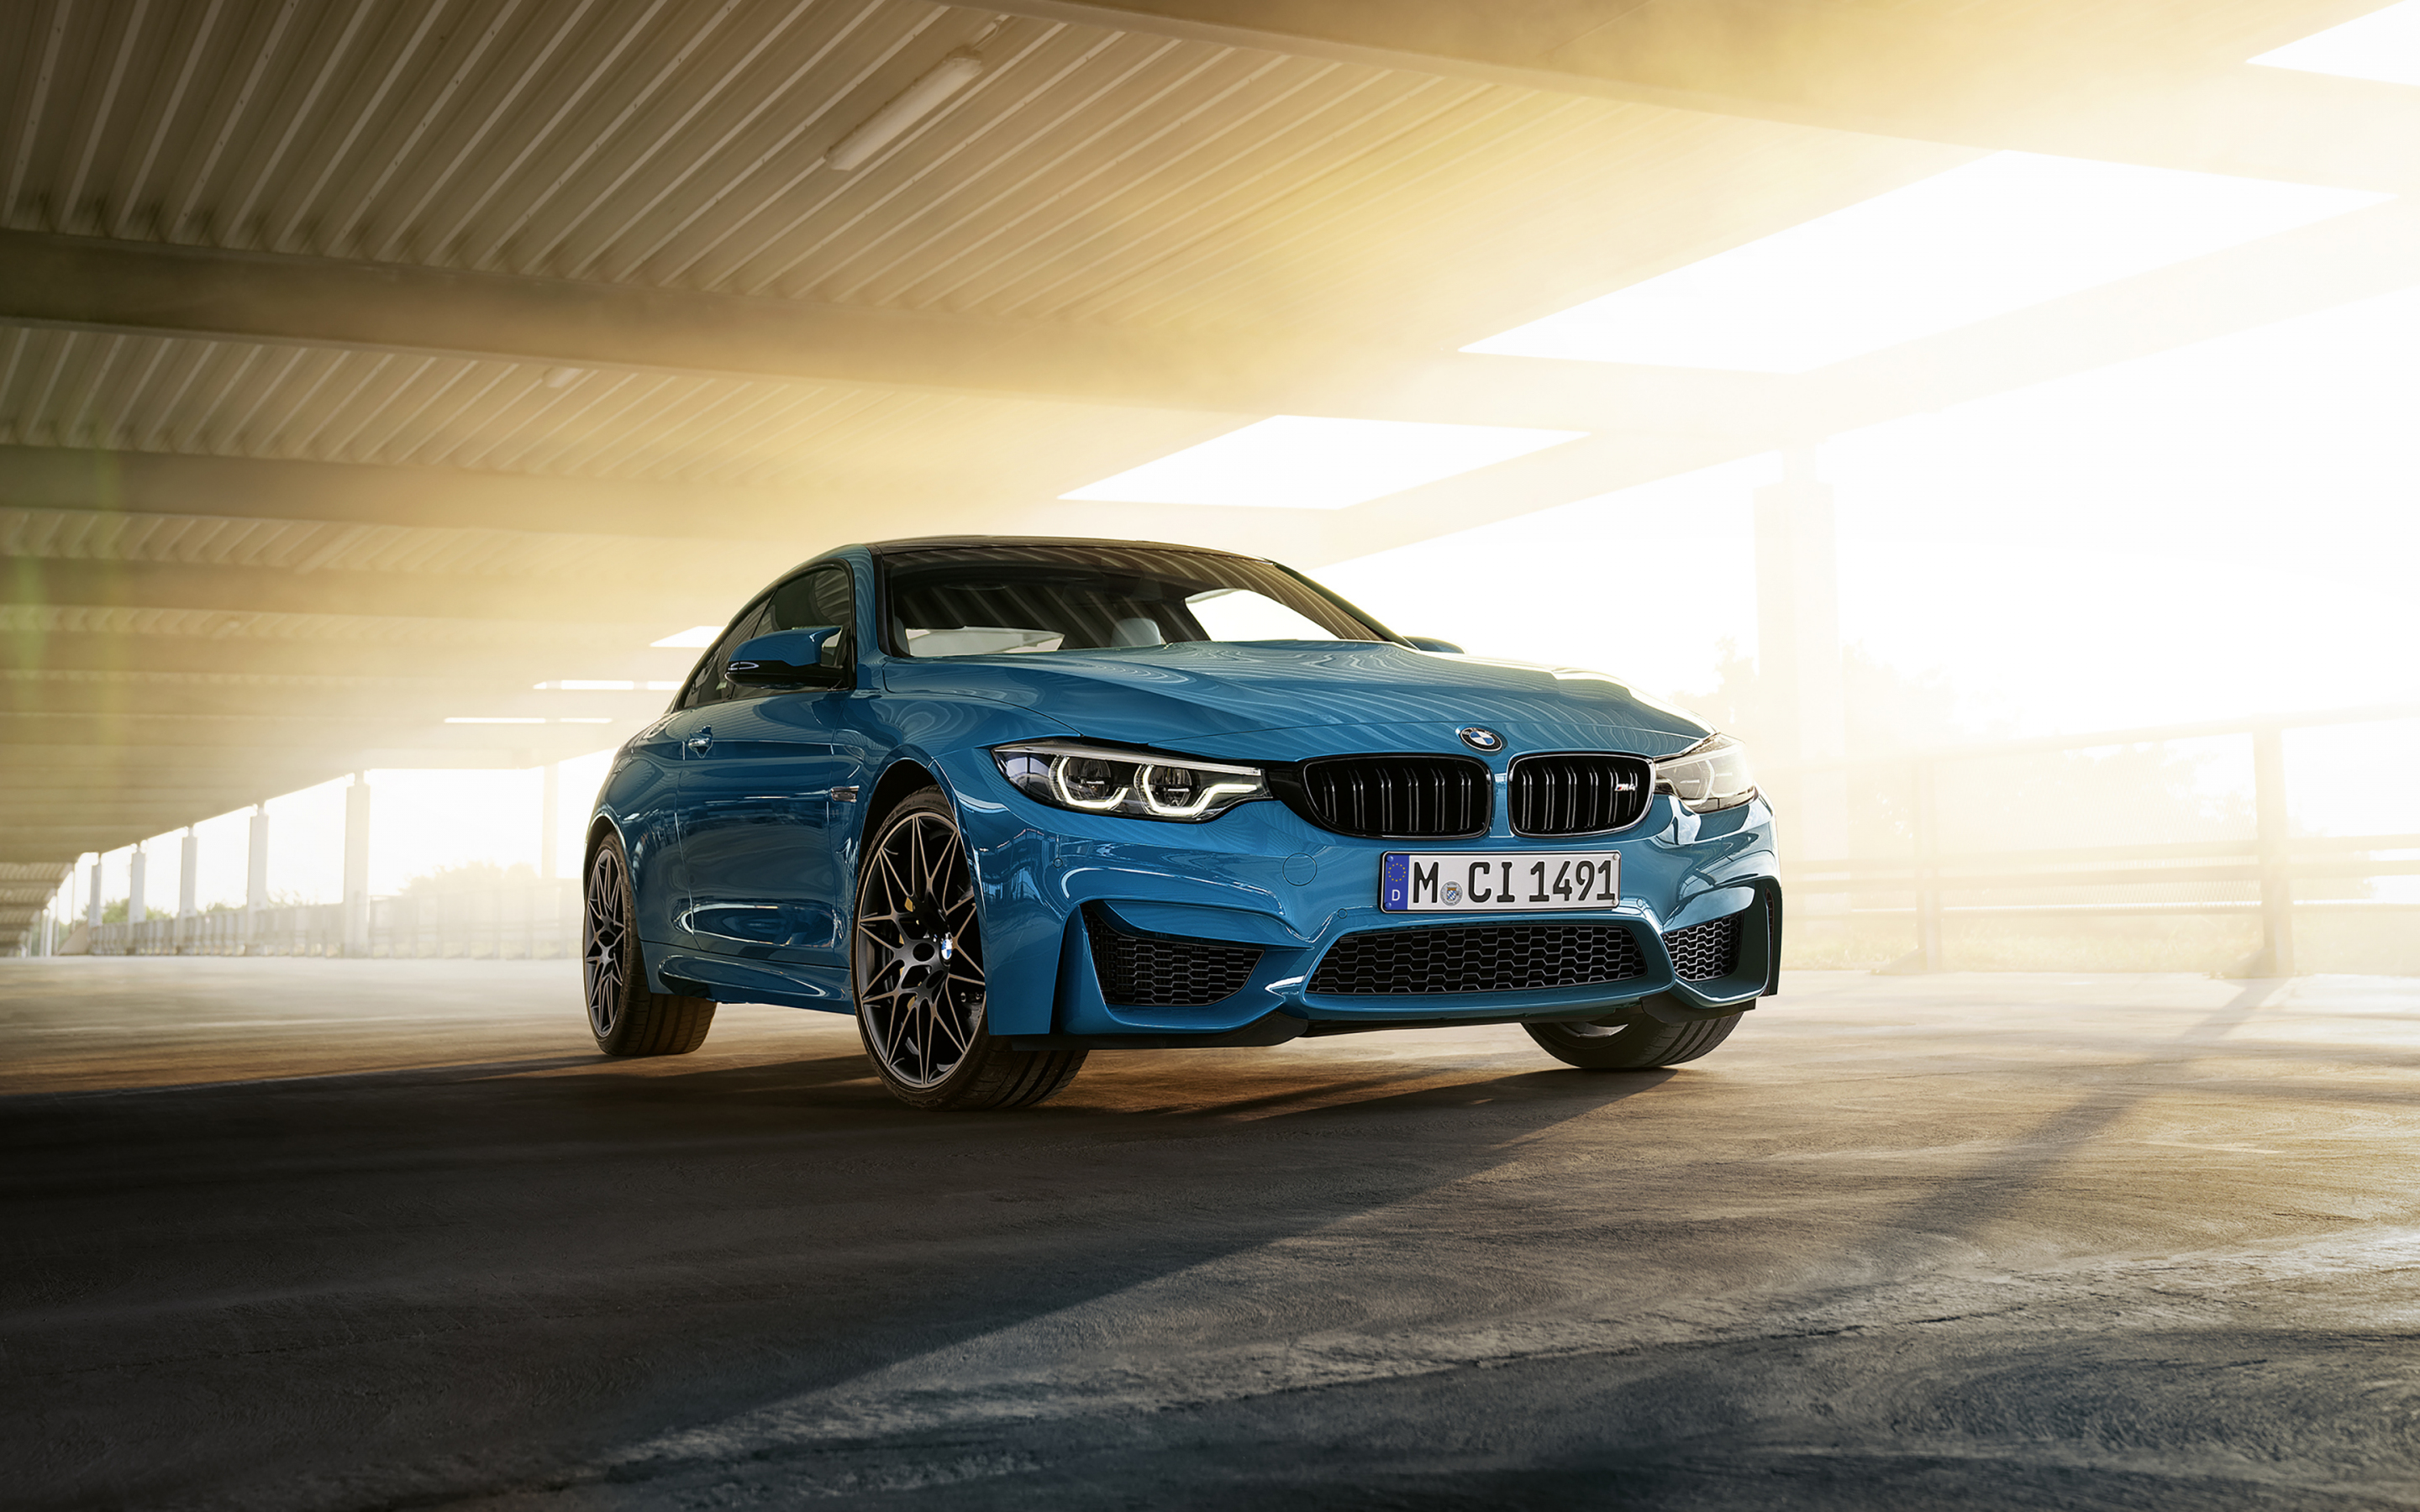 BMW M4 Coupe Heritage Edition, blue car, 2019, 2880x1800 wallpaper